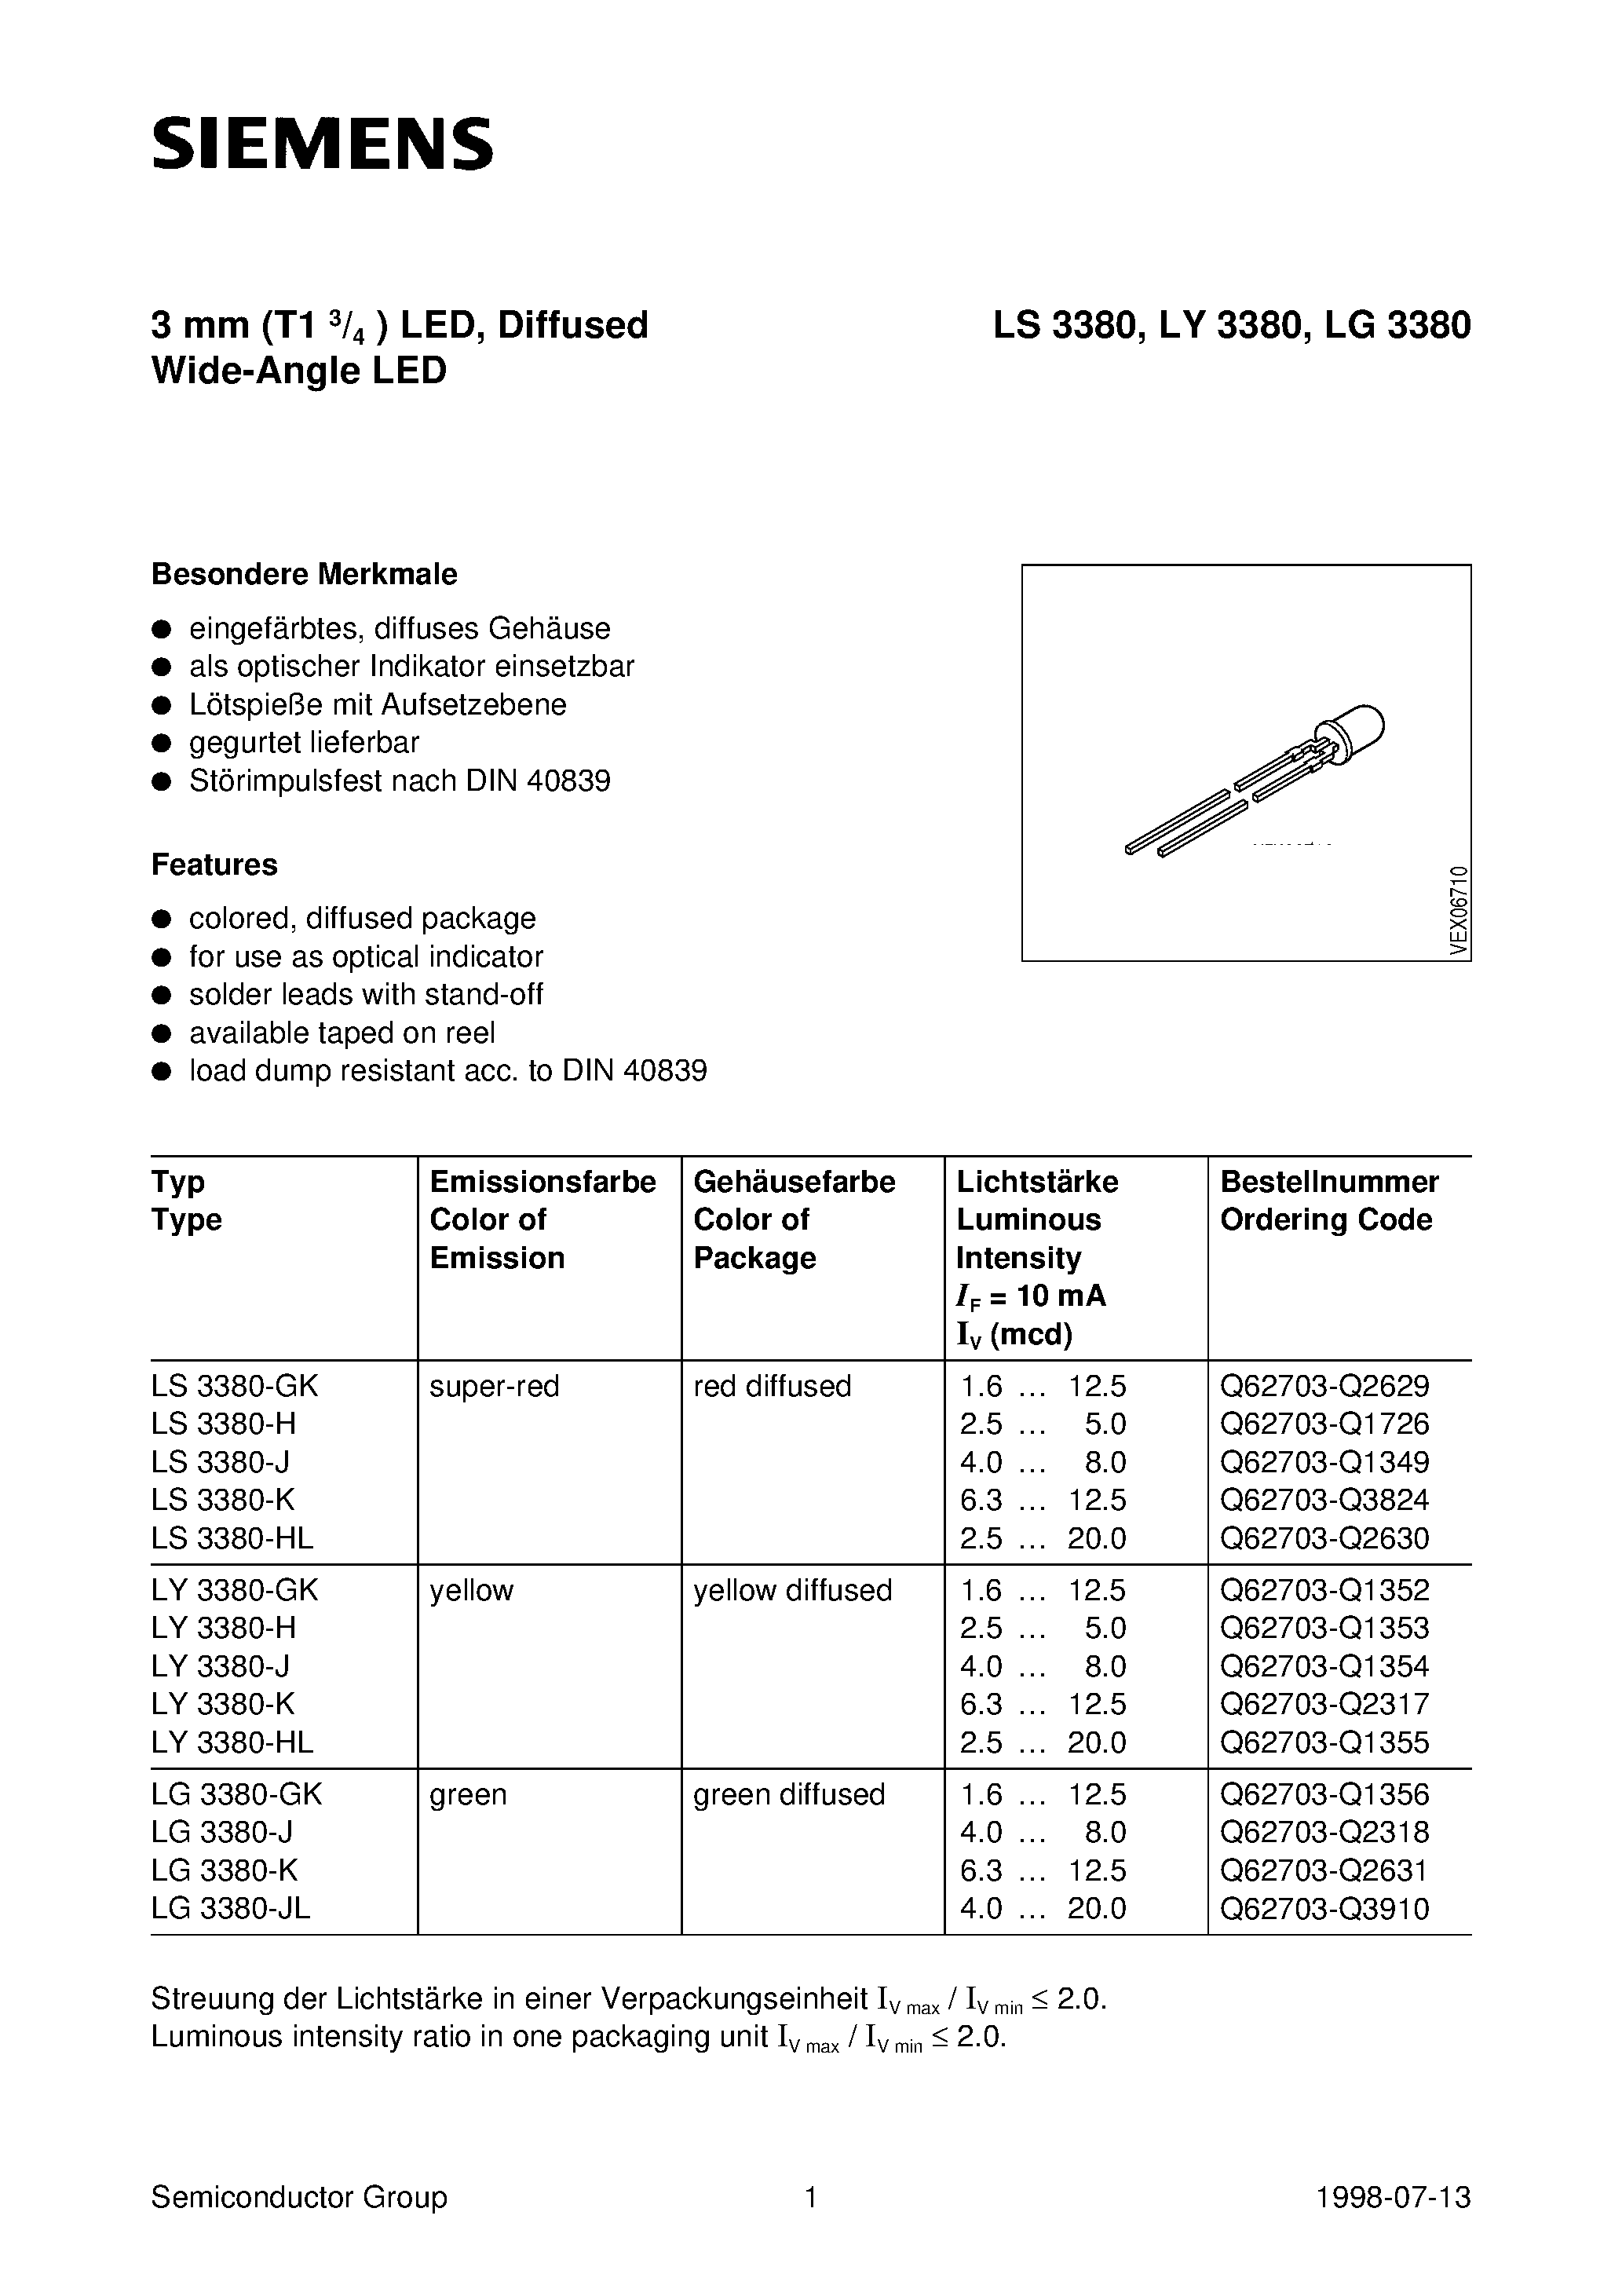 Datasheet LY3380-K - 3 mm T1 3/4 LED/ Diffused Wide-Angle LED page 1